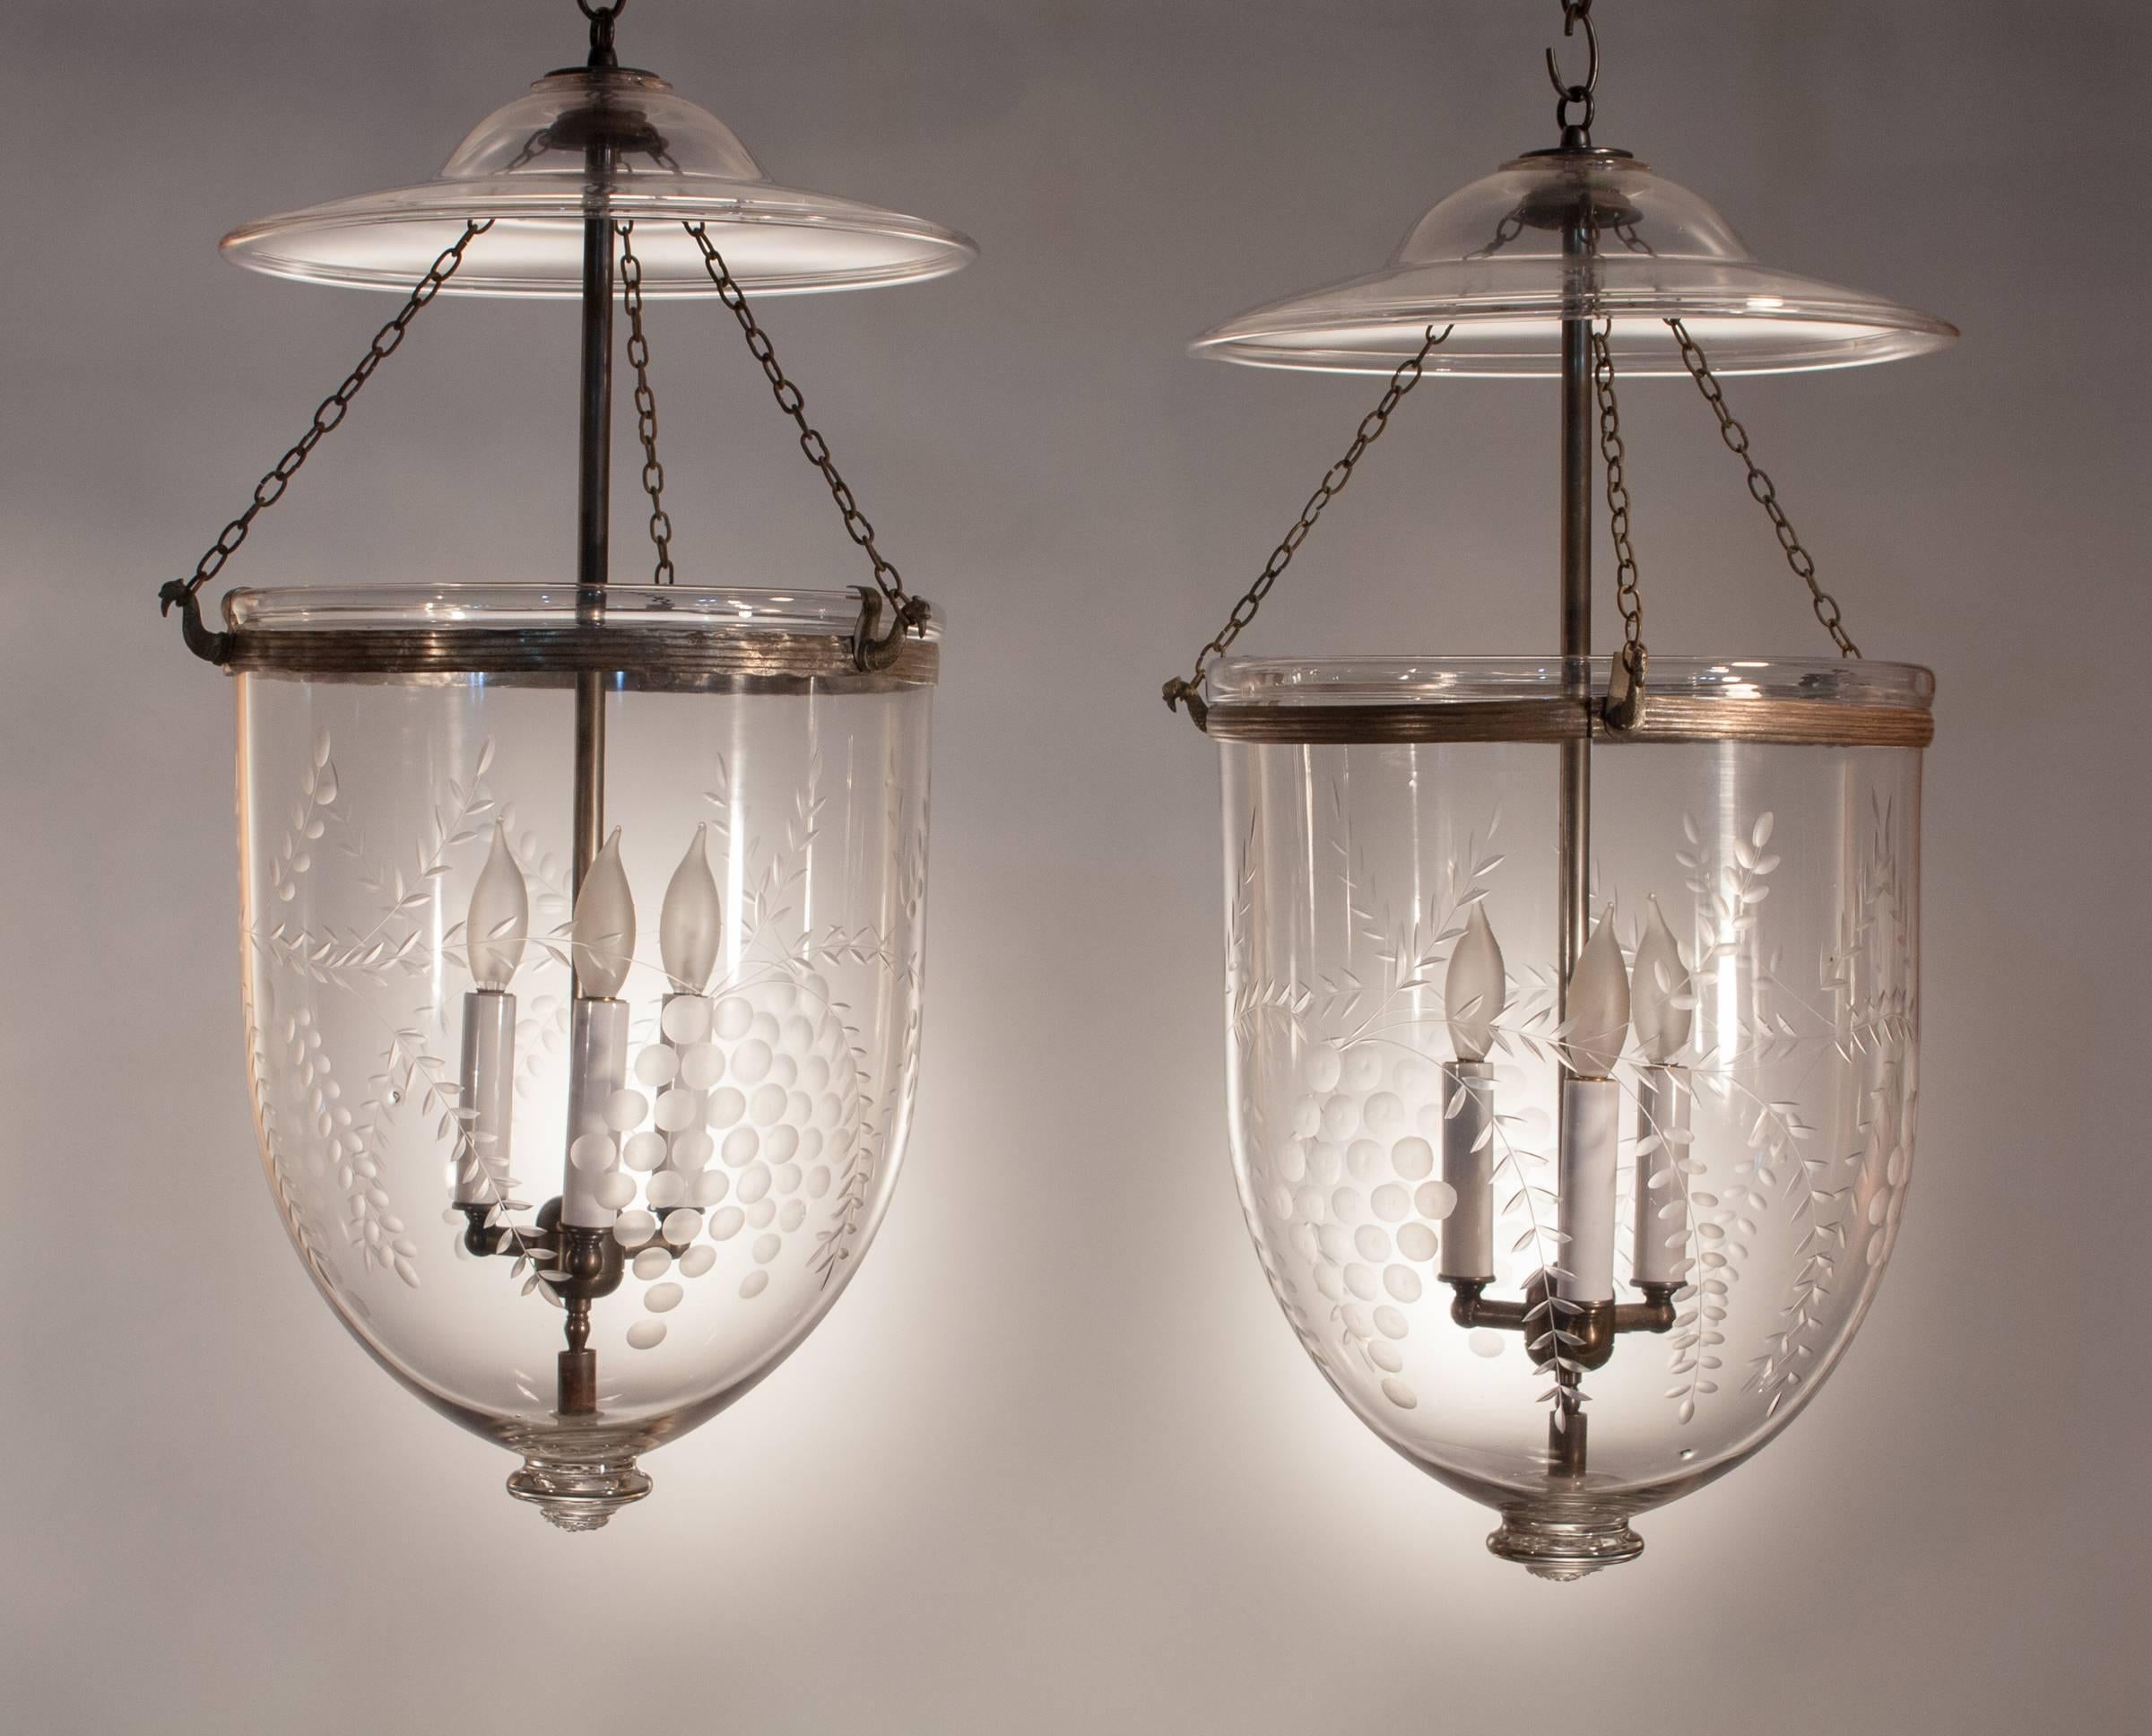 An outstanding and well-matched pair of 19th century, larger-sized English bell jar hall lanterns with an etched grape and vine pattern that complements the contours of these hand blown glass hall lanterns nicely. The pendants are in excellent